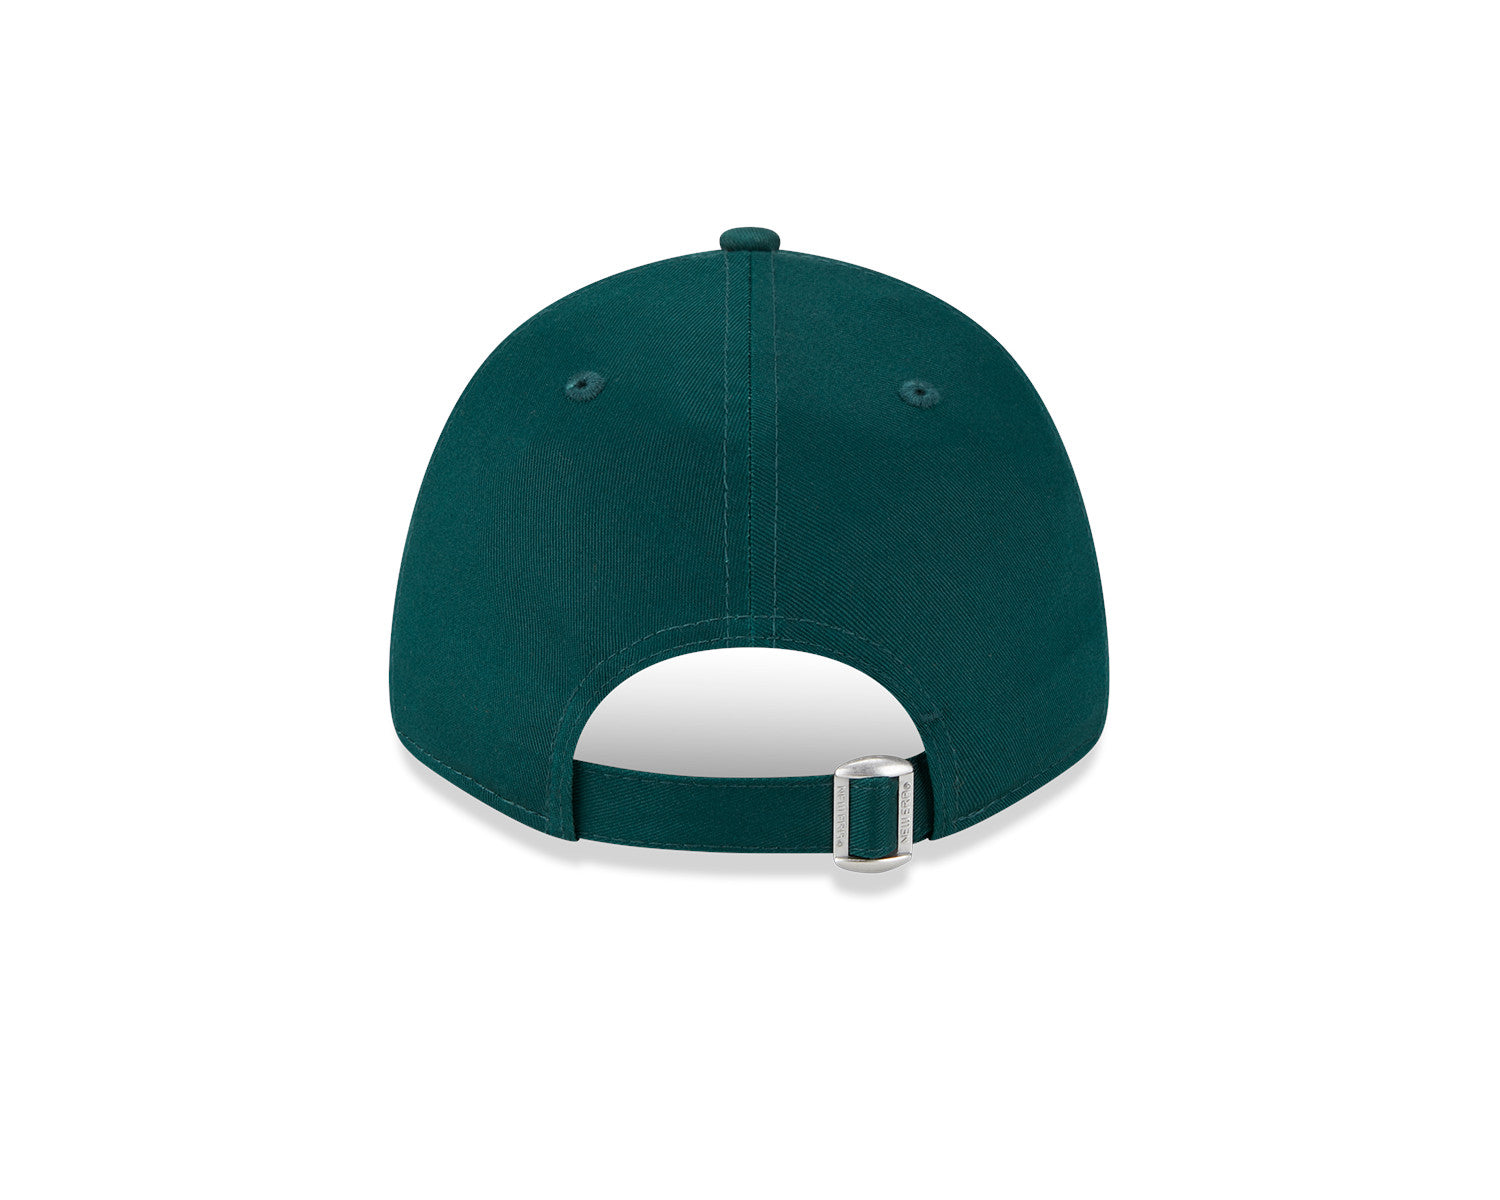 NEW ERA 9FORTY MLB BOSTON RED SOX LEAGUE ESSENTIAL GREEN CAP